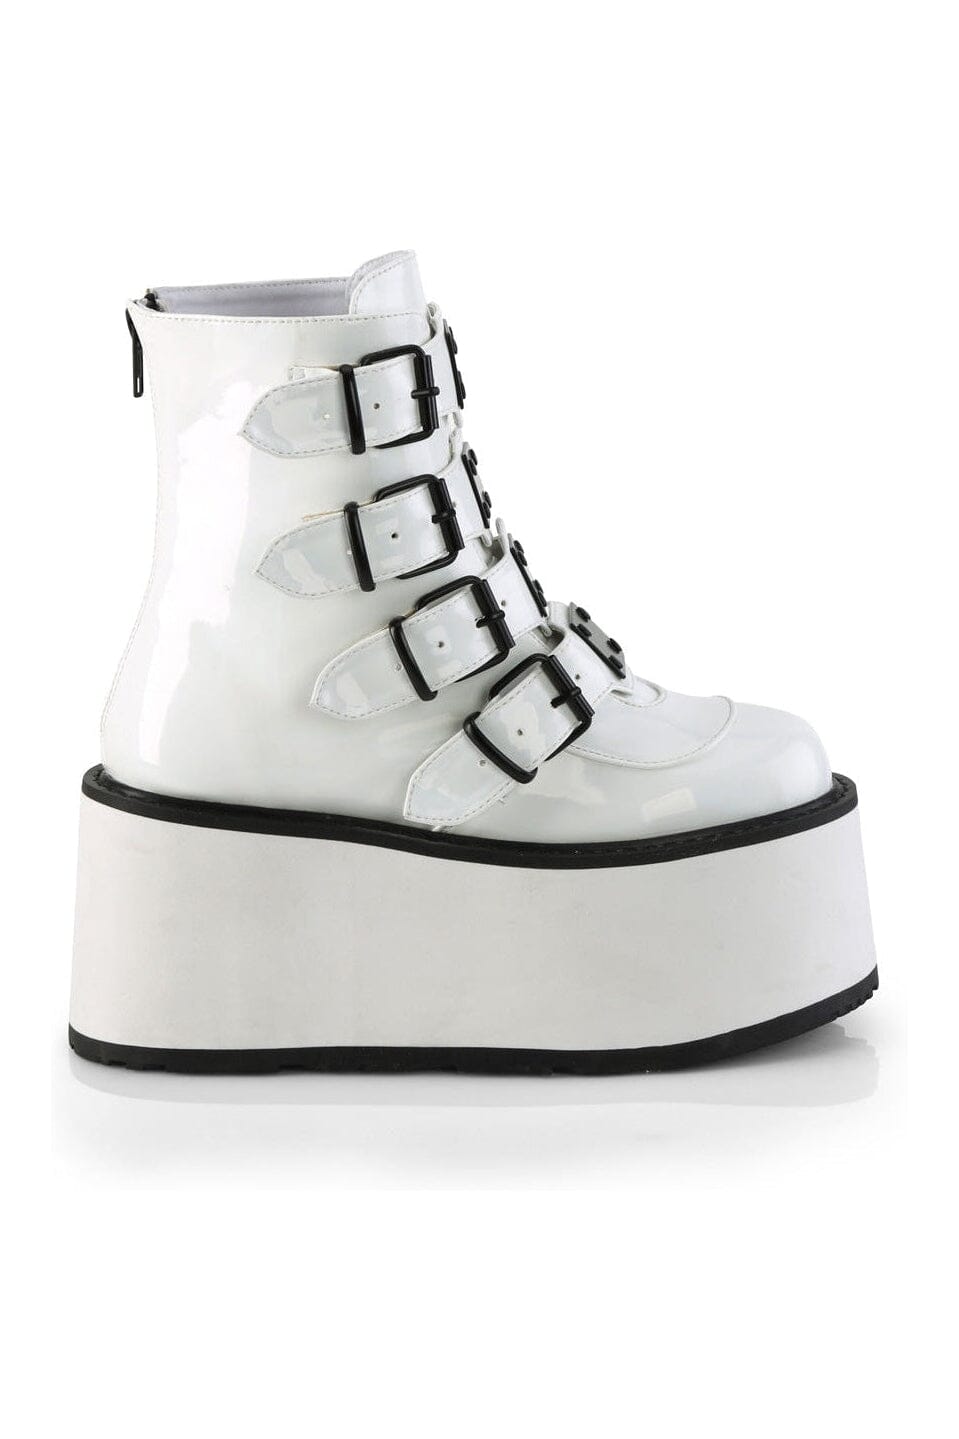 DAMNED-105 White Hologram Patent Ankle Boot-Ankle Boots-Demonia-SEXYSHOES.COM